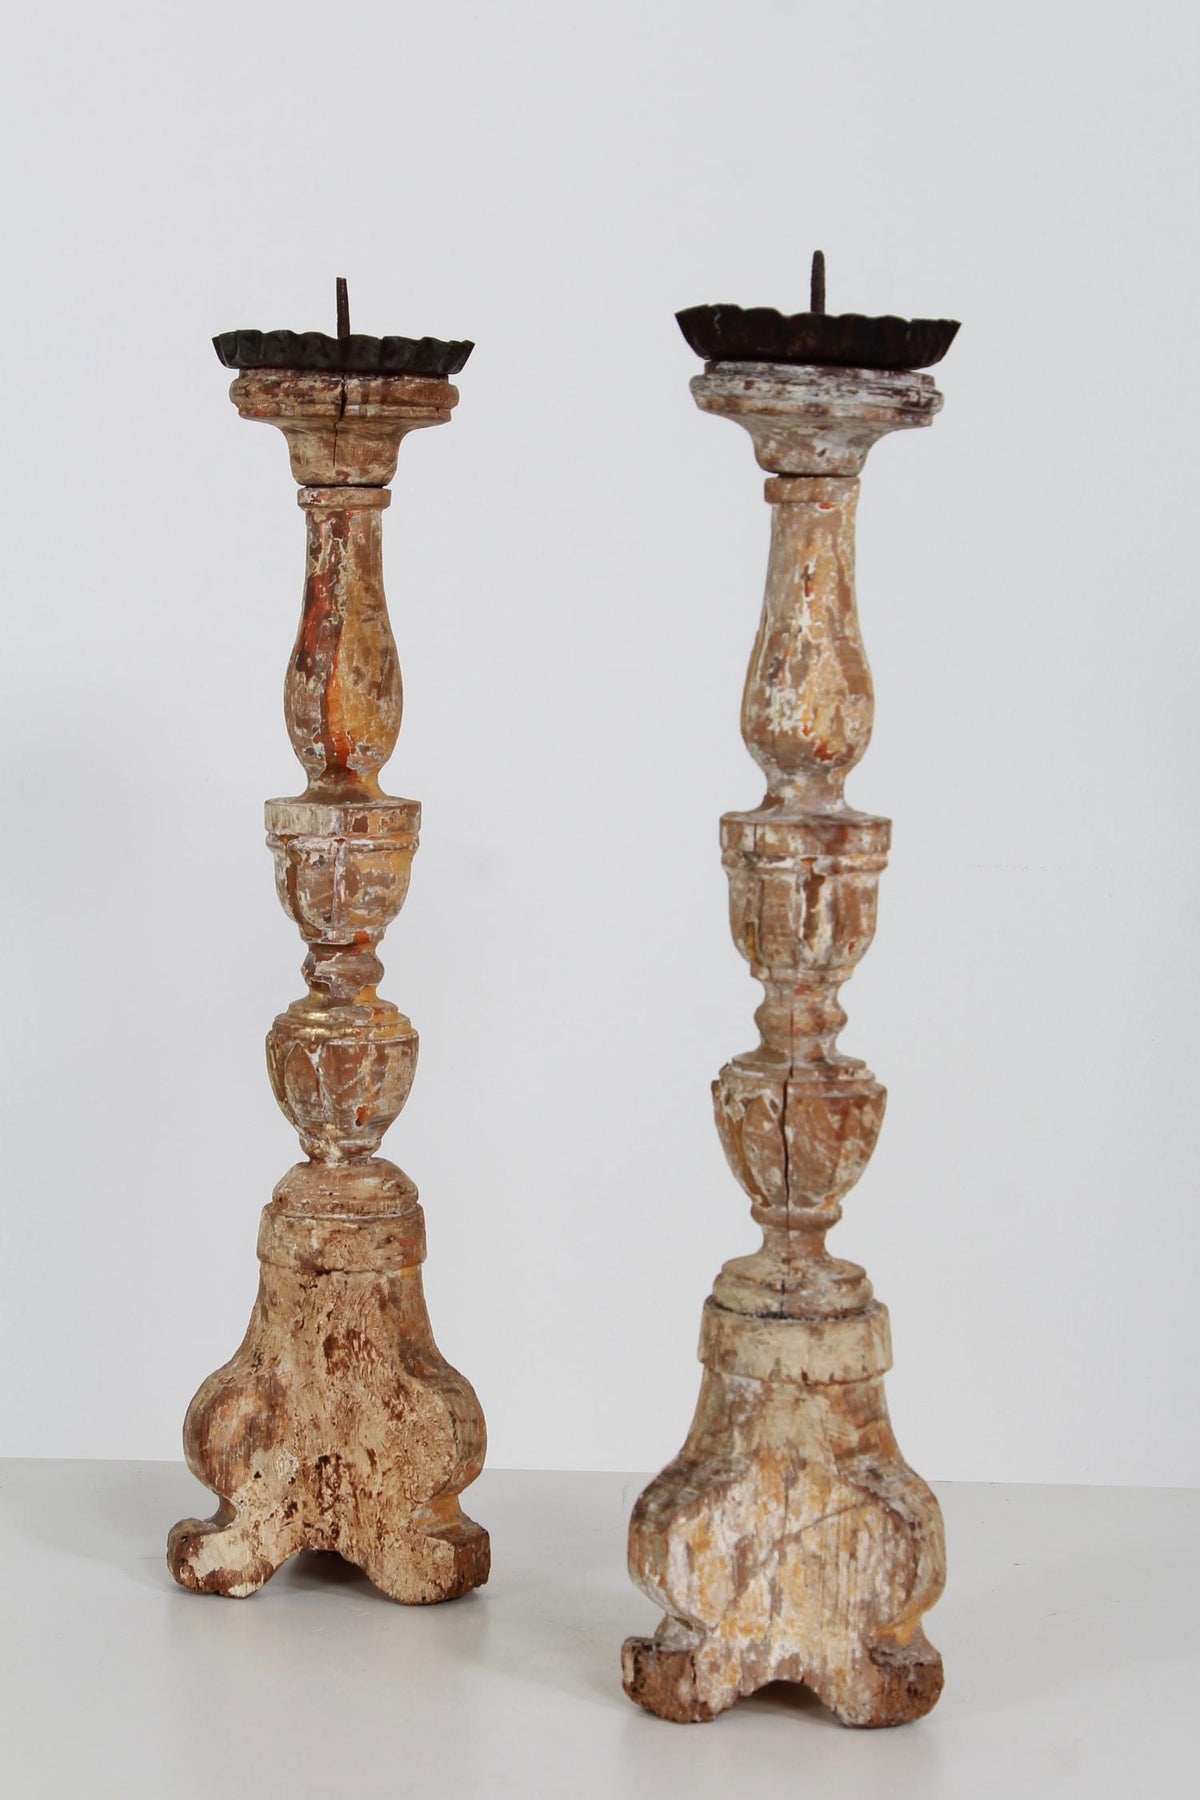 A wonderful Pair of Continental Late 18thC  Pricket Candlesticks